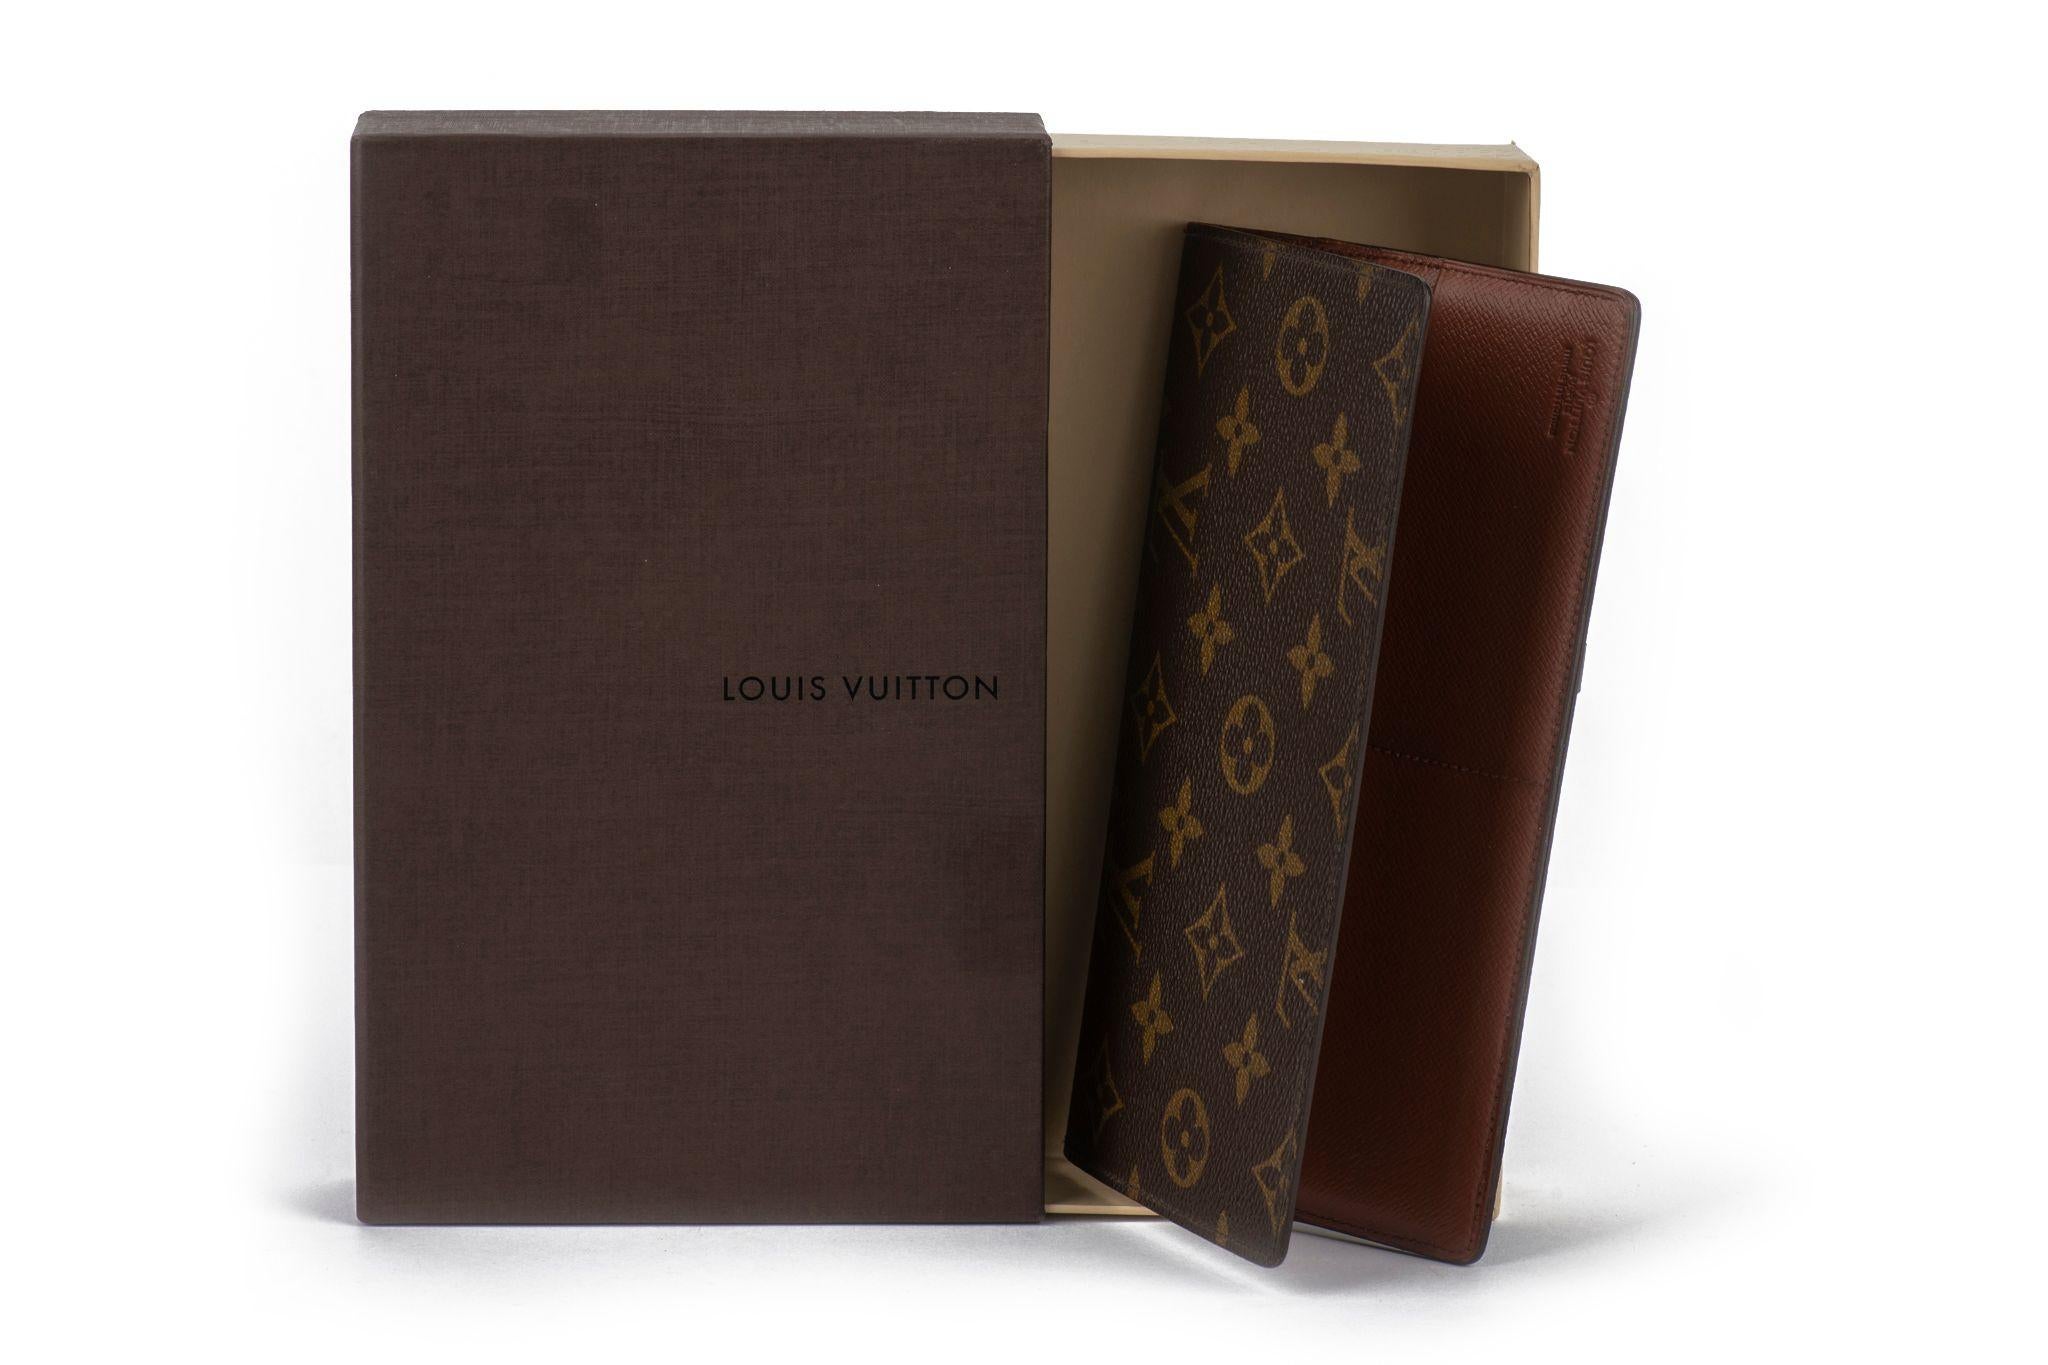 Louis Vuitton classic monogram checkbook holder in excellent condition. Coated canvas with contrast stitching. Comes with original box.